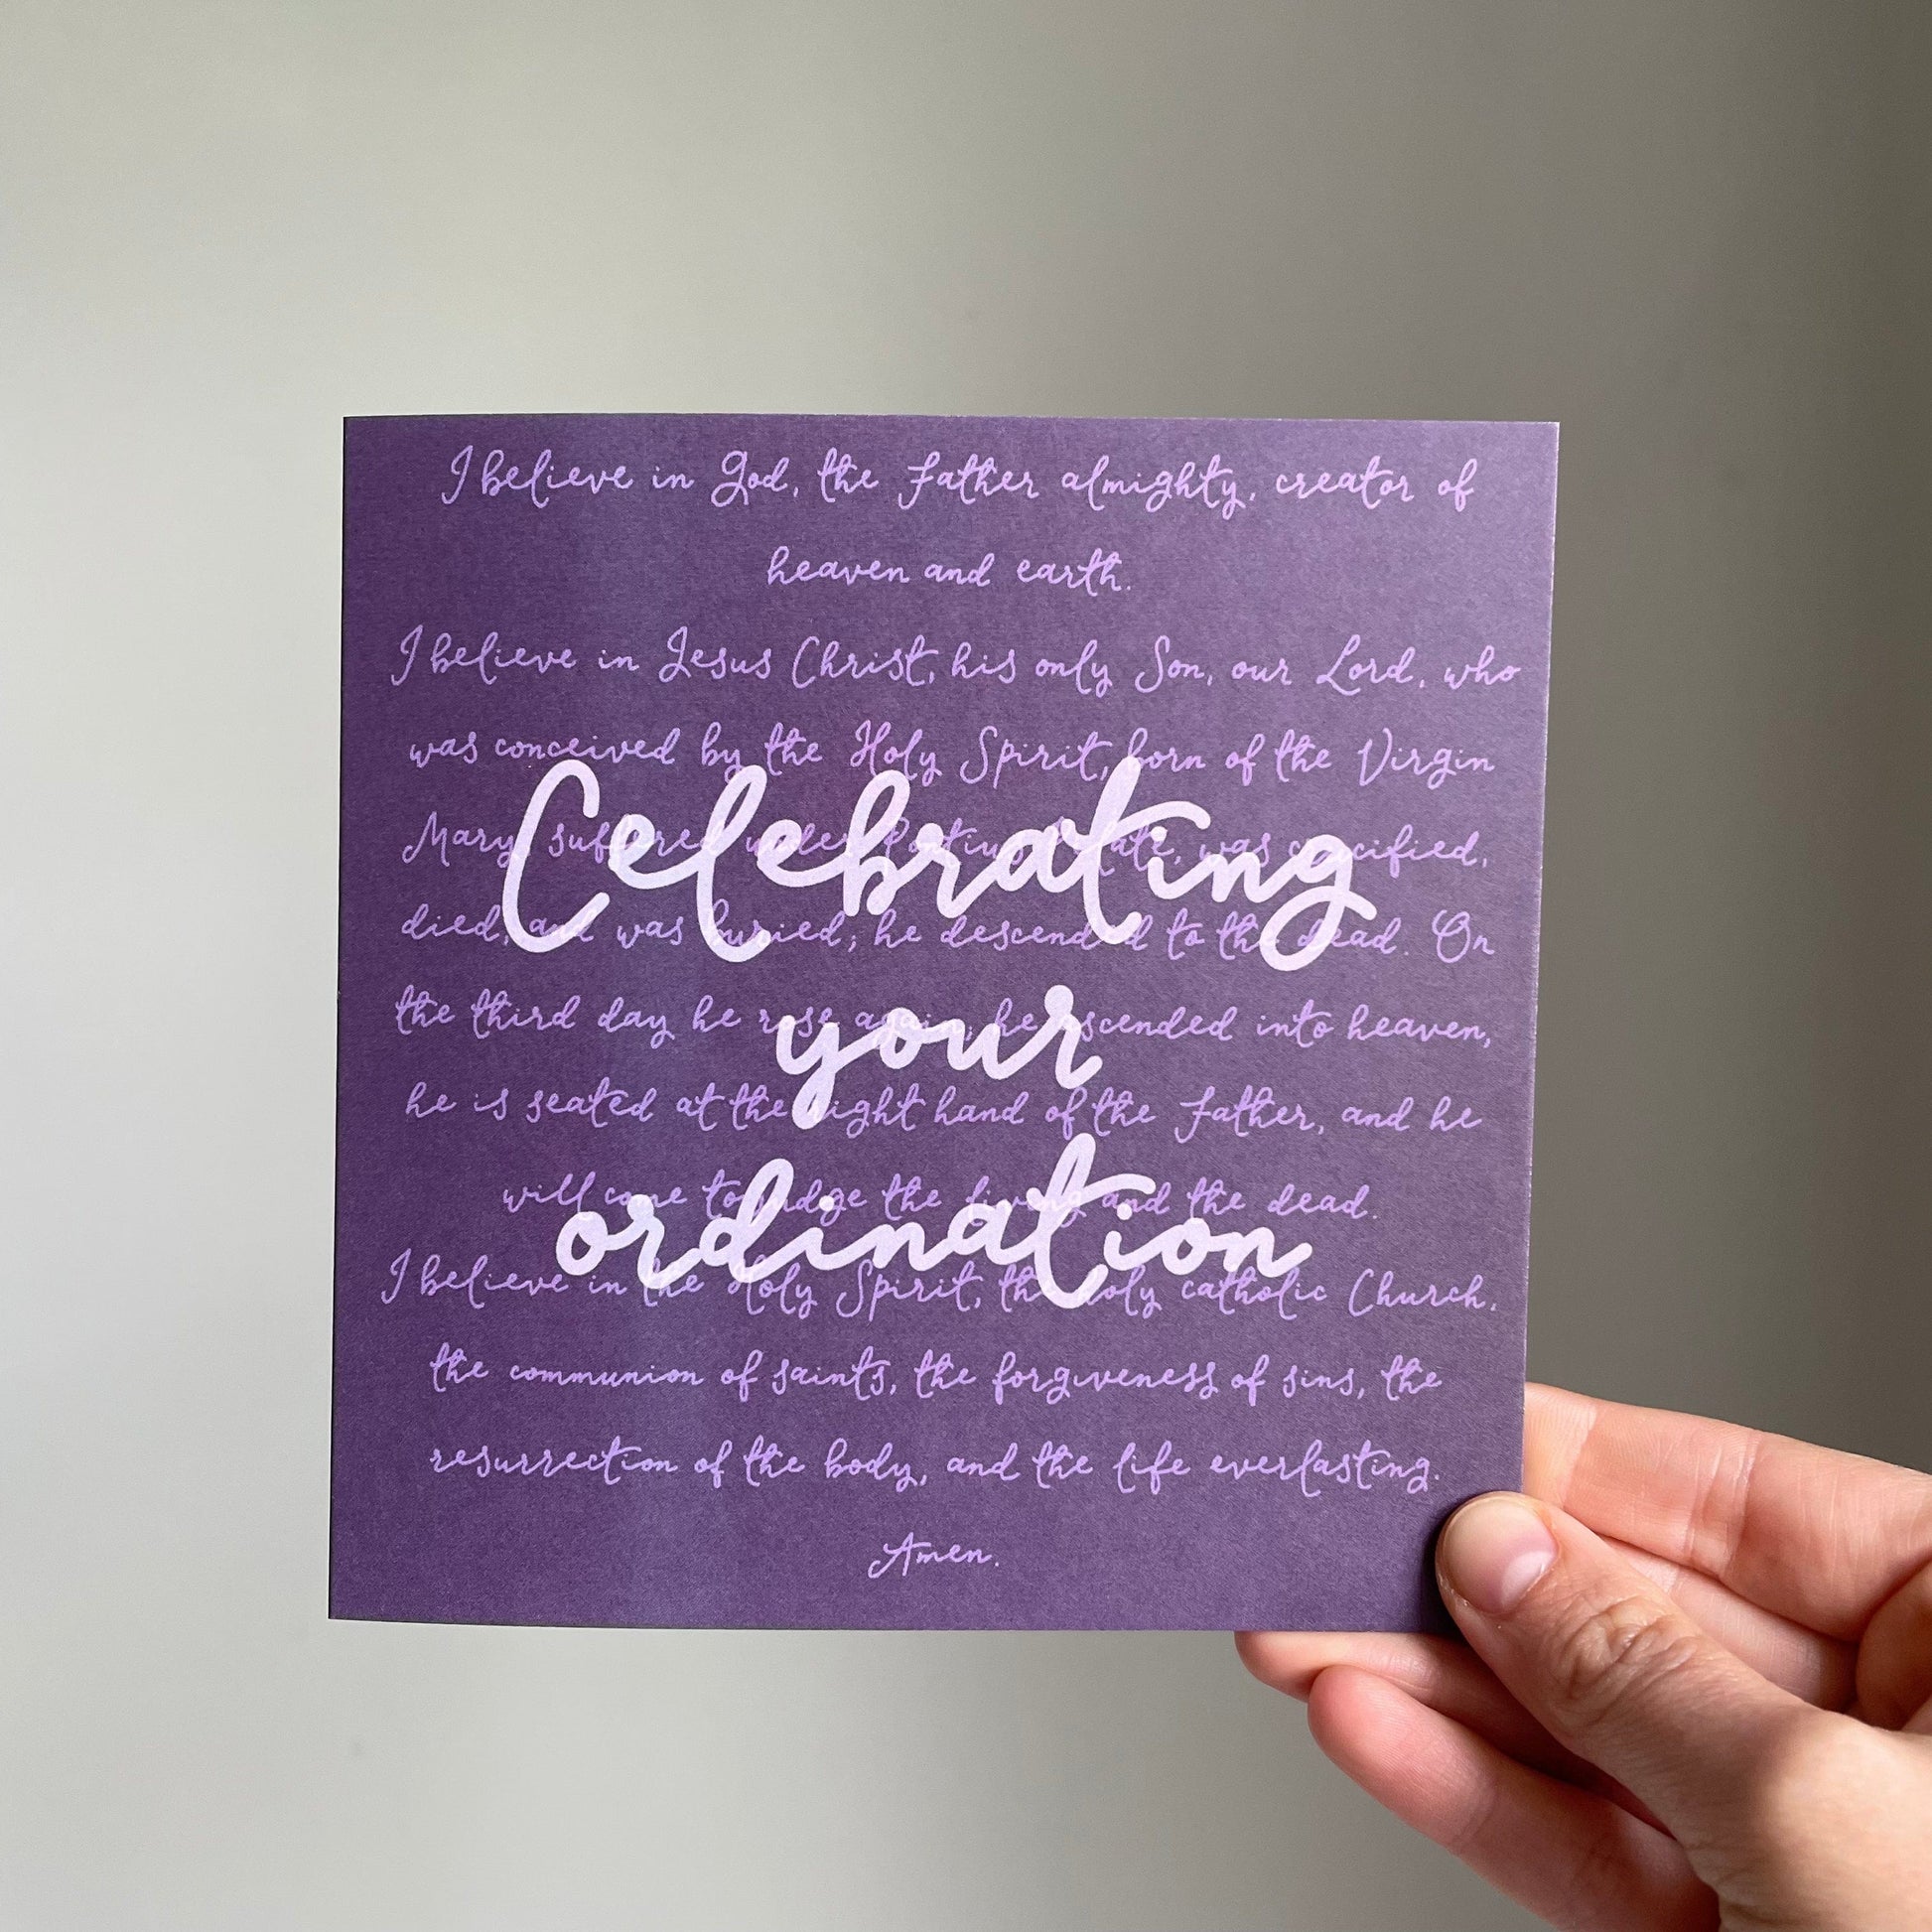 Ordination card - celebrating your ordination - apostles creed And Hope Designs Greeting & Note Cards